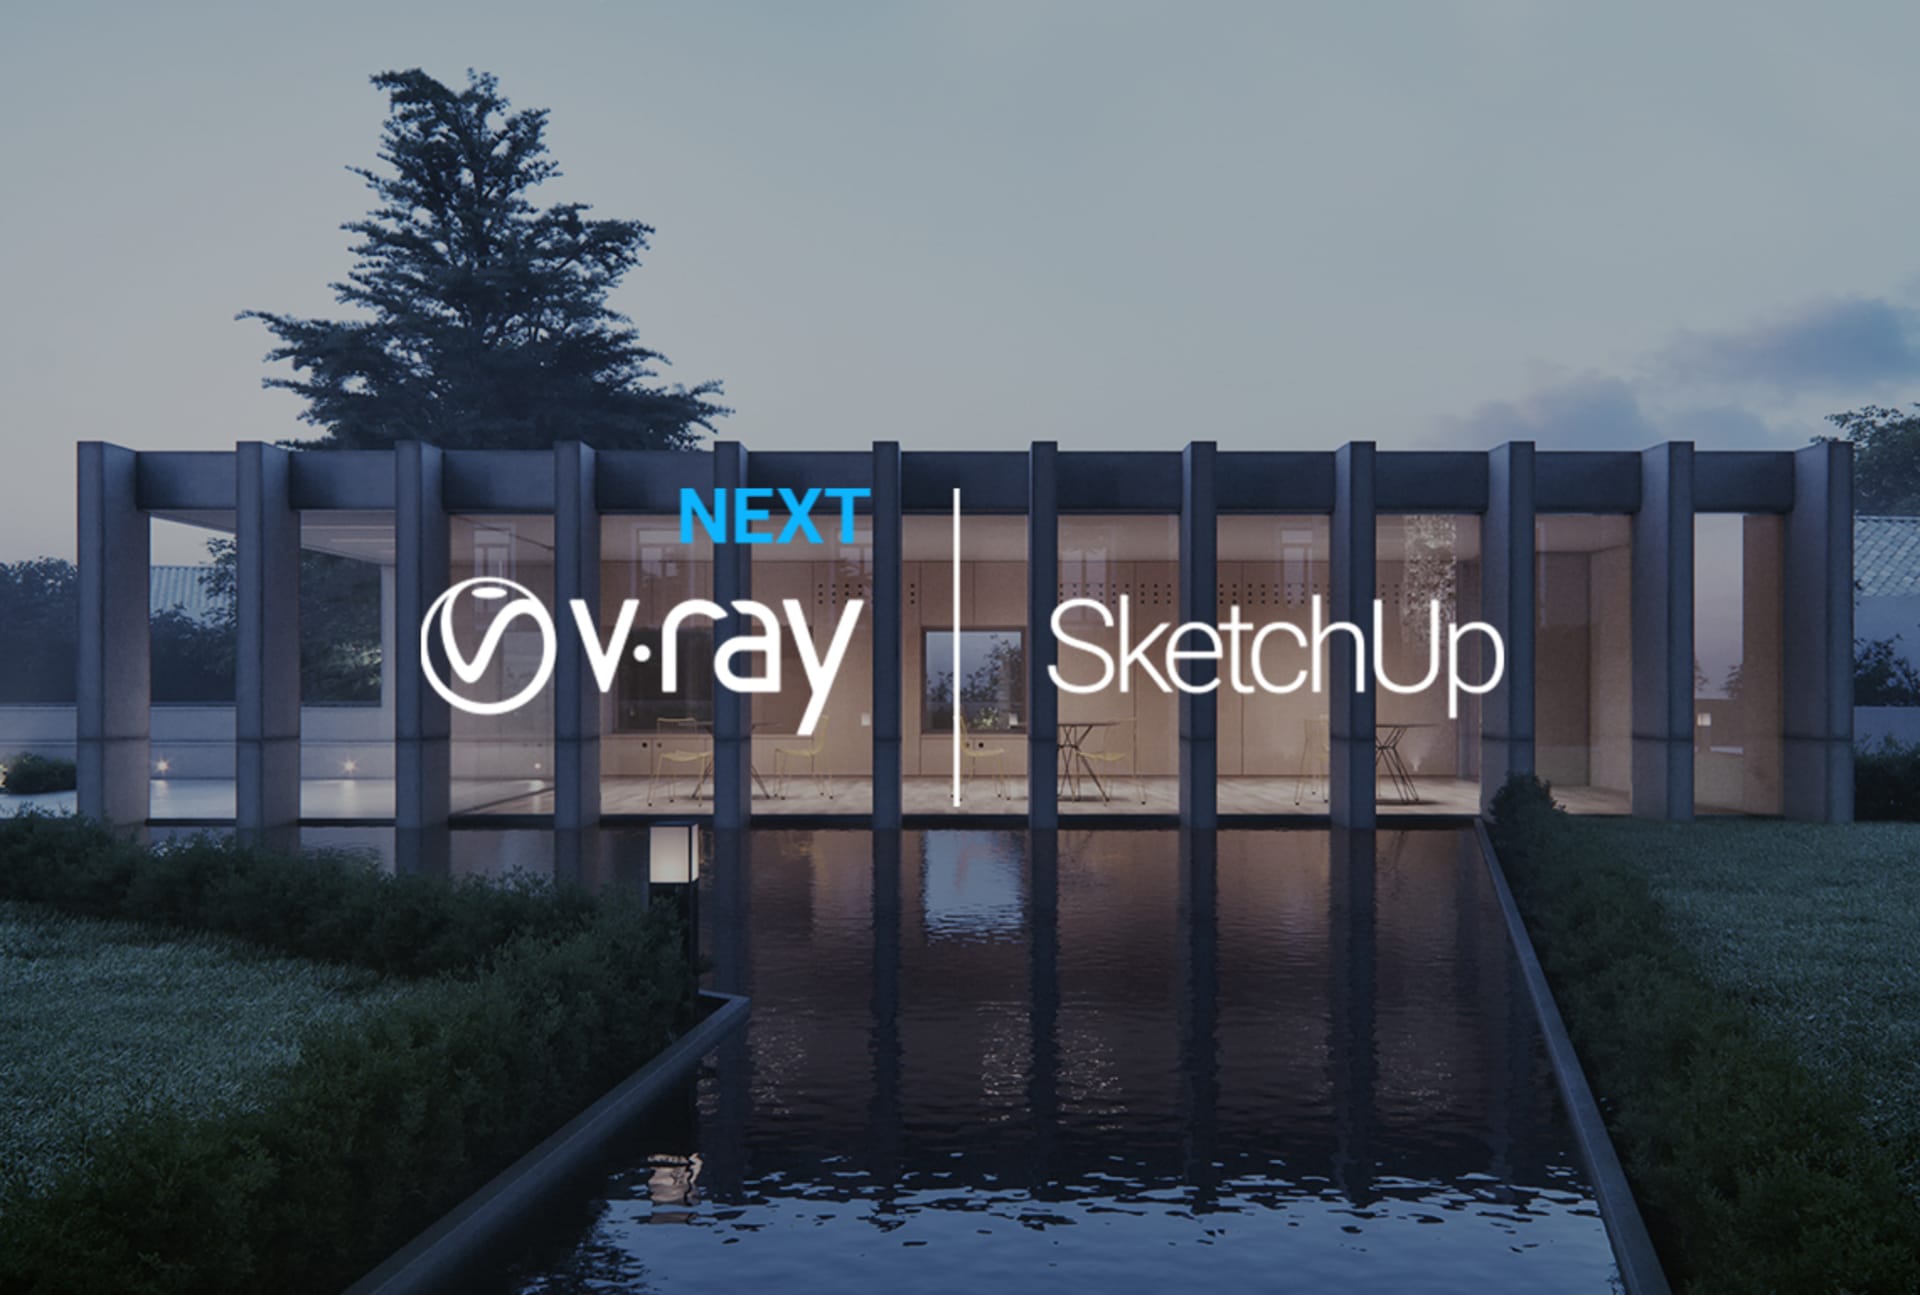 vray for 3ds max 2021 free download